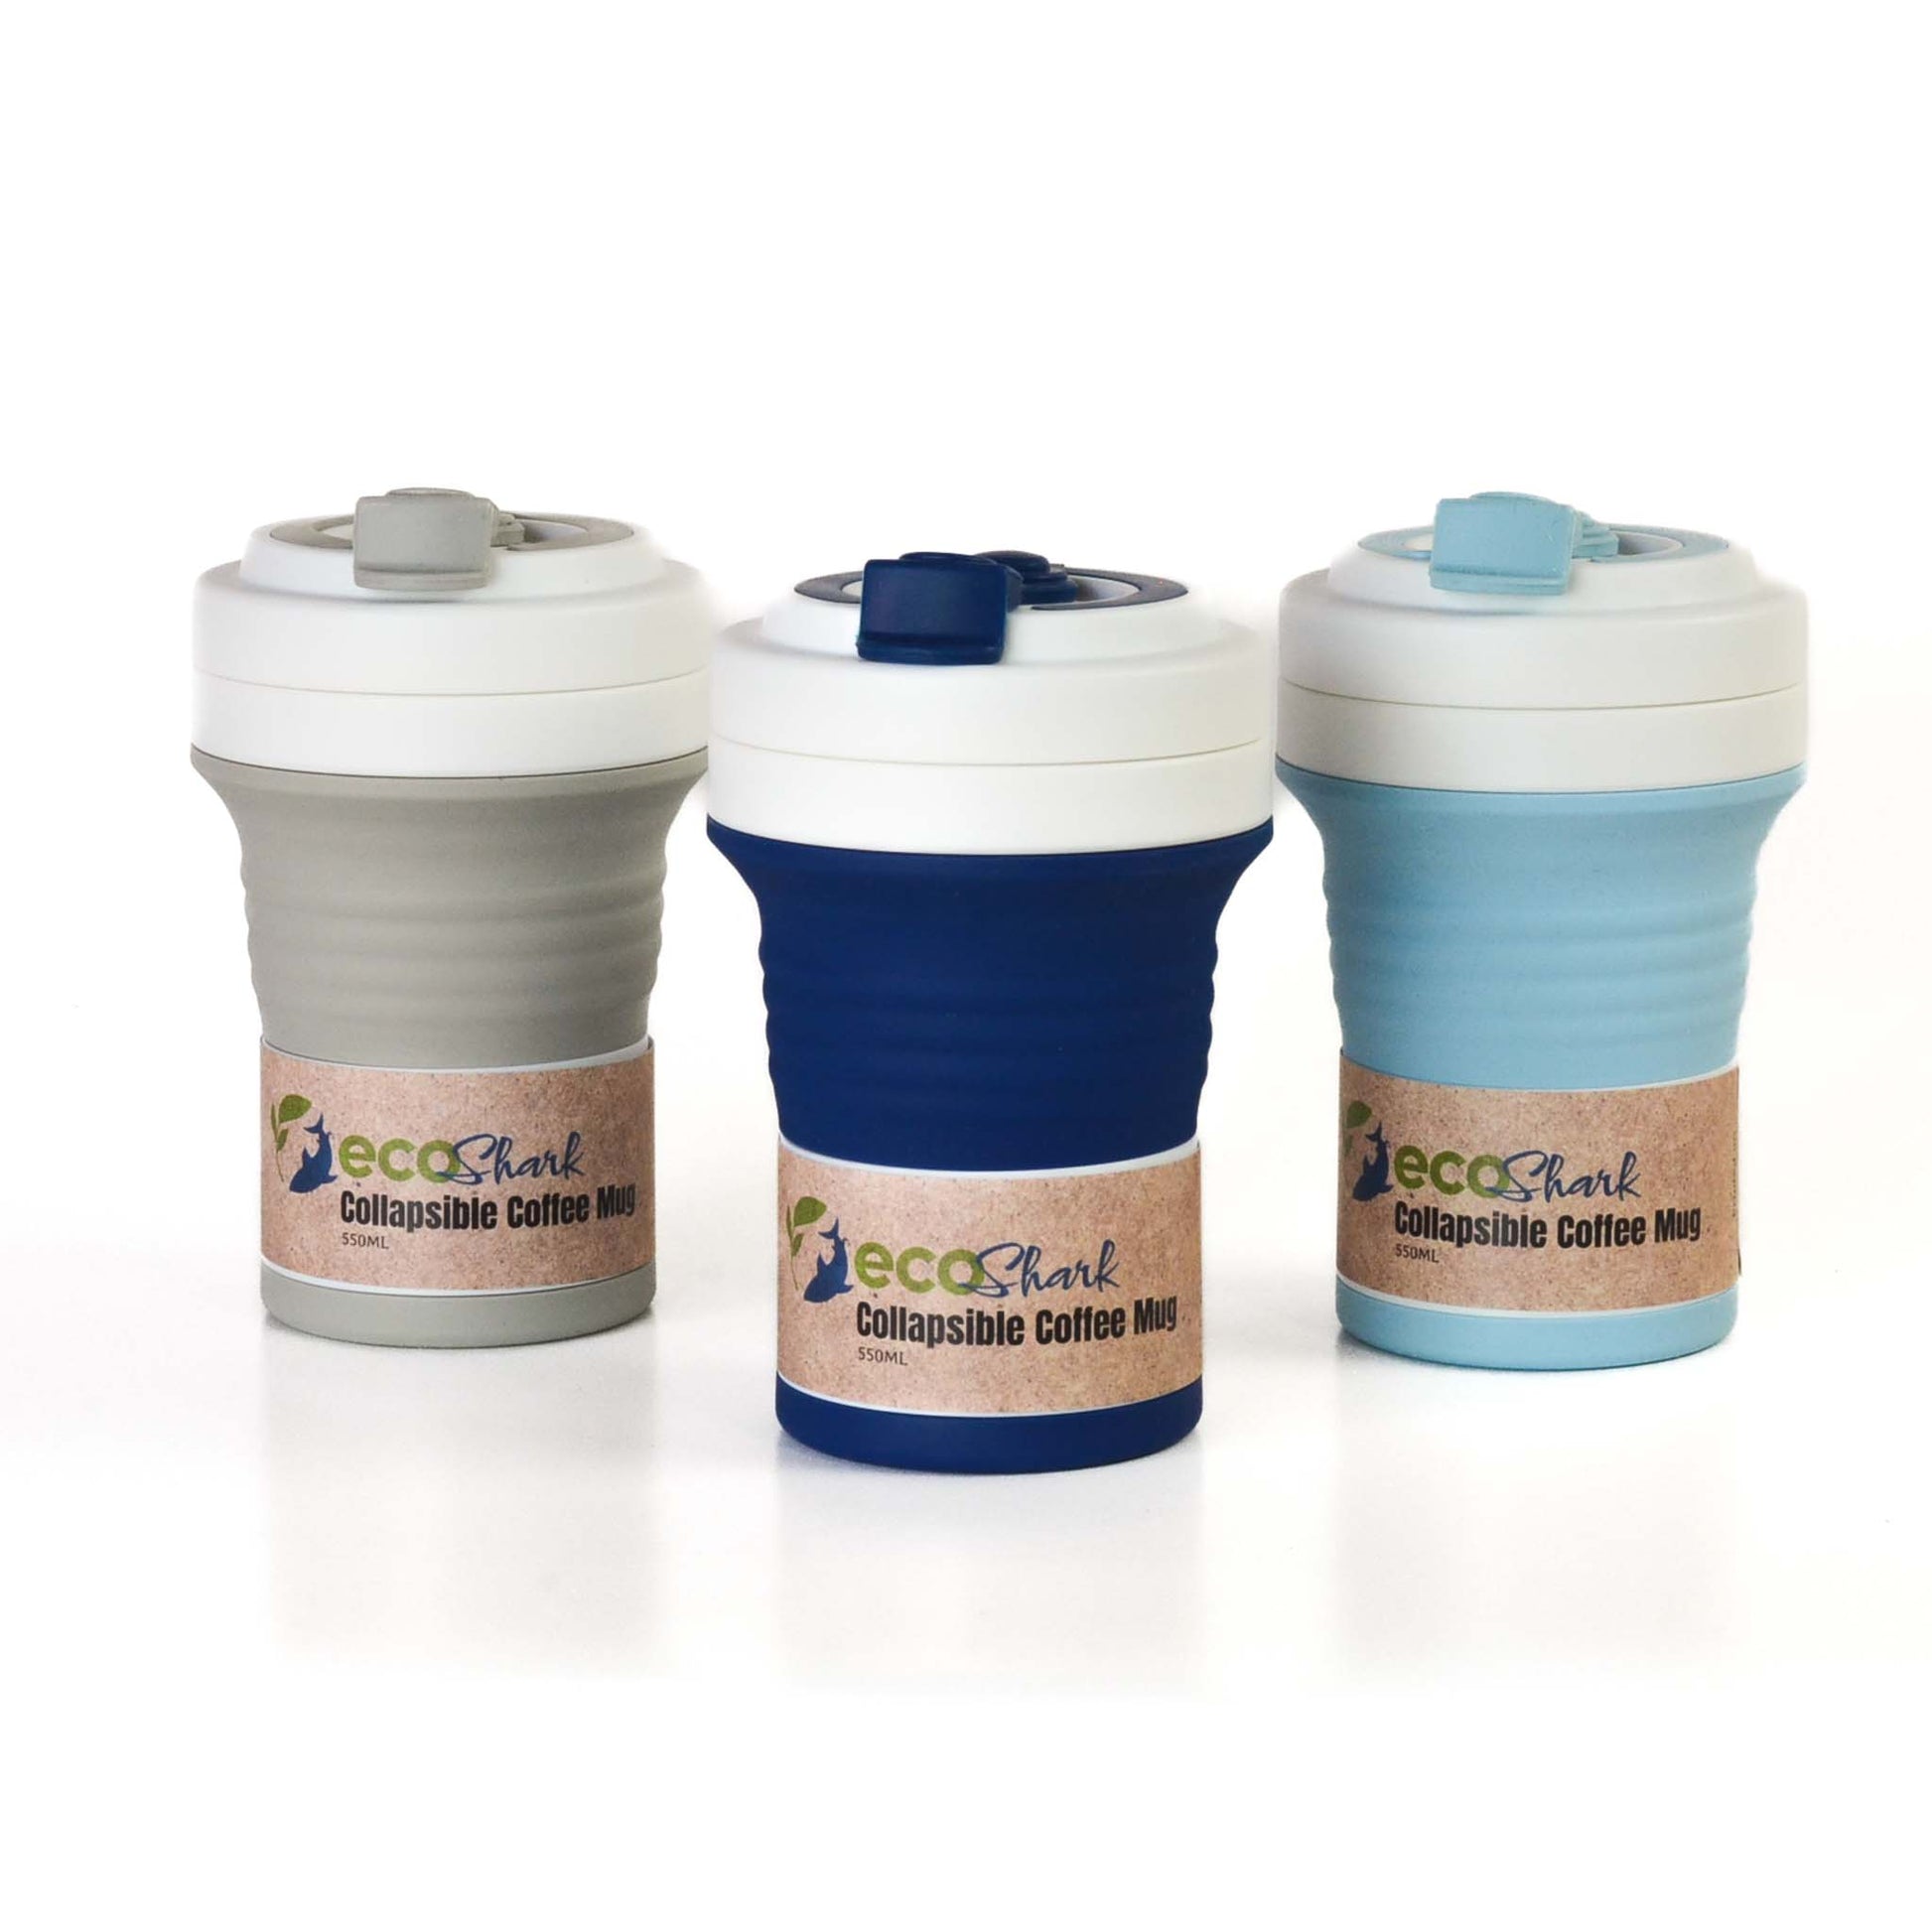 Silicone Coffee Cup, Silicone Cups, Collapsible Travel Cup